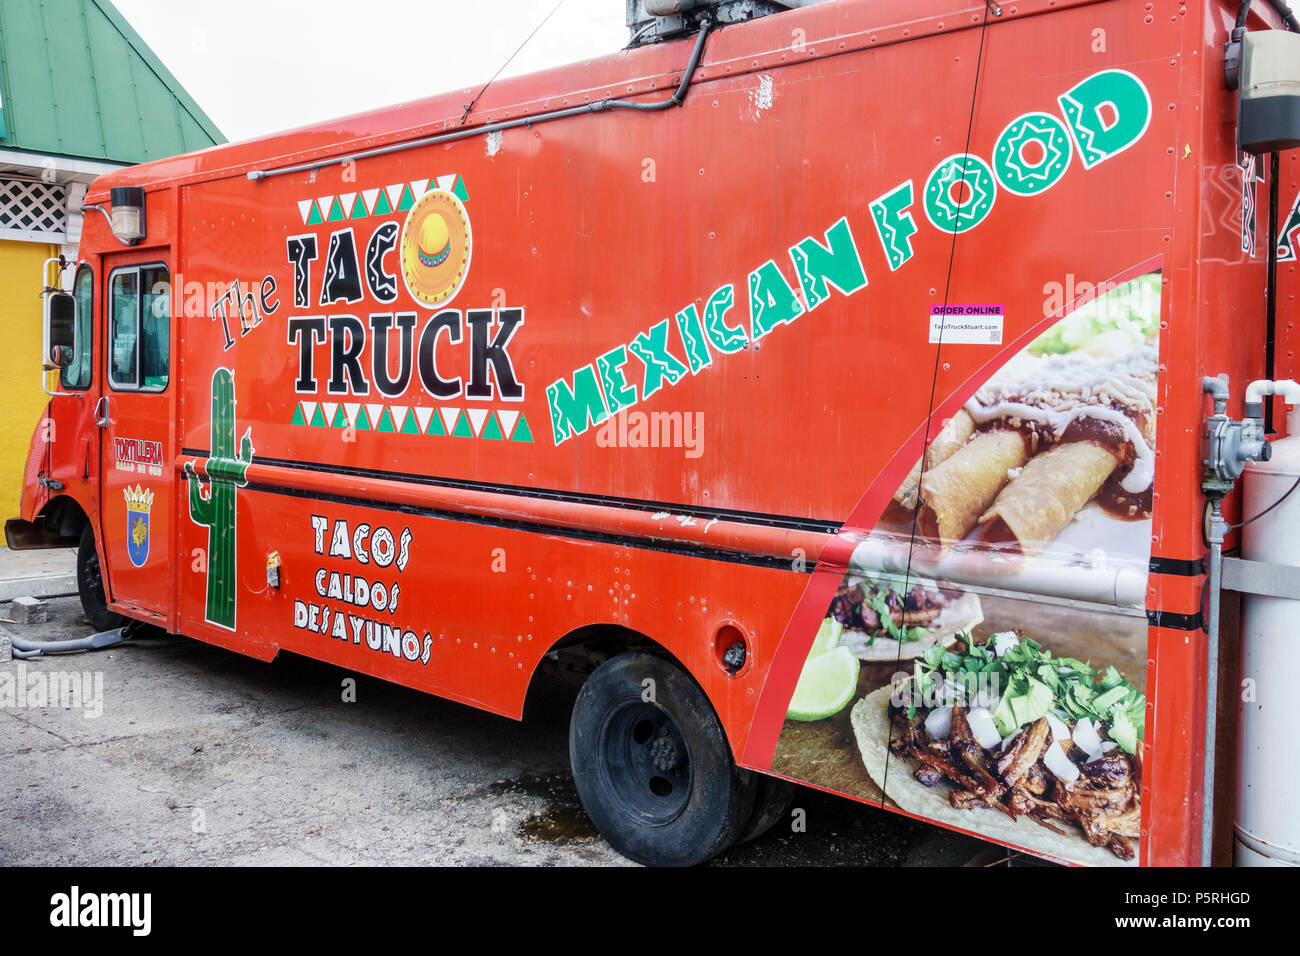 Stuart Florida,The Taco Truck Mexican Food,food truck,pop-up restaurant,street food industry,ethnic cuisine,visitors travel traveling tour tourist tou Stock Photo